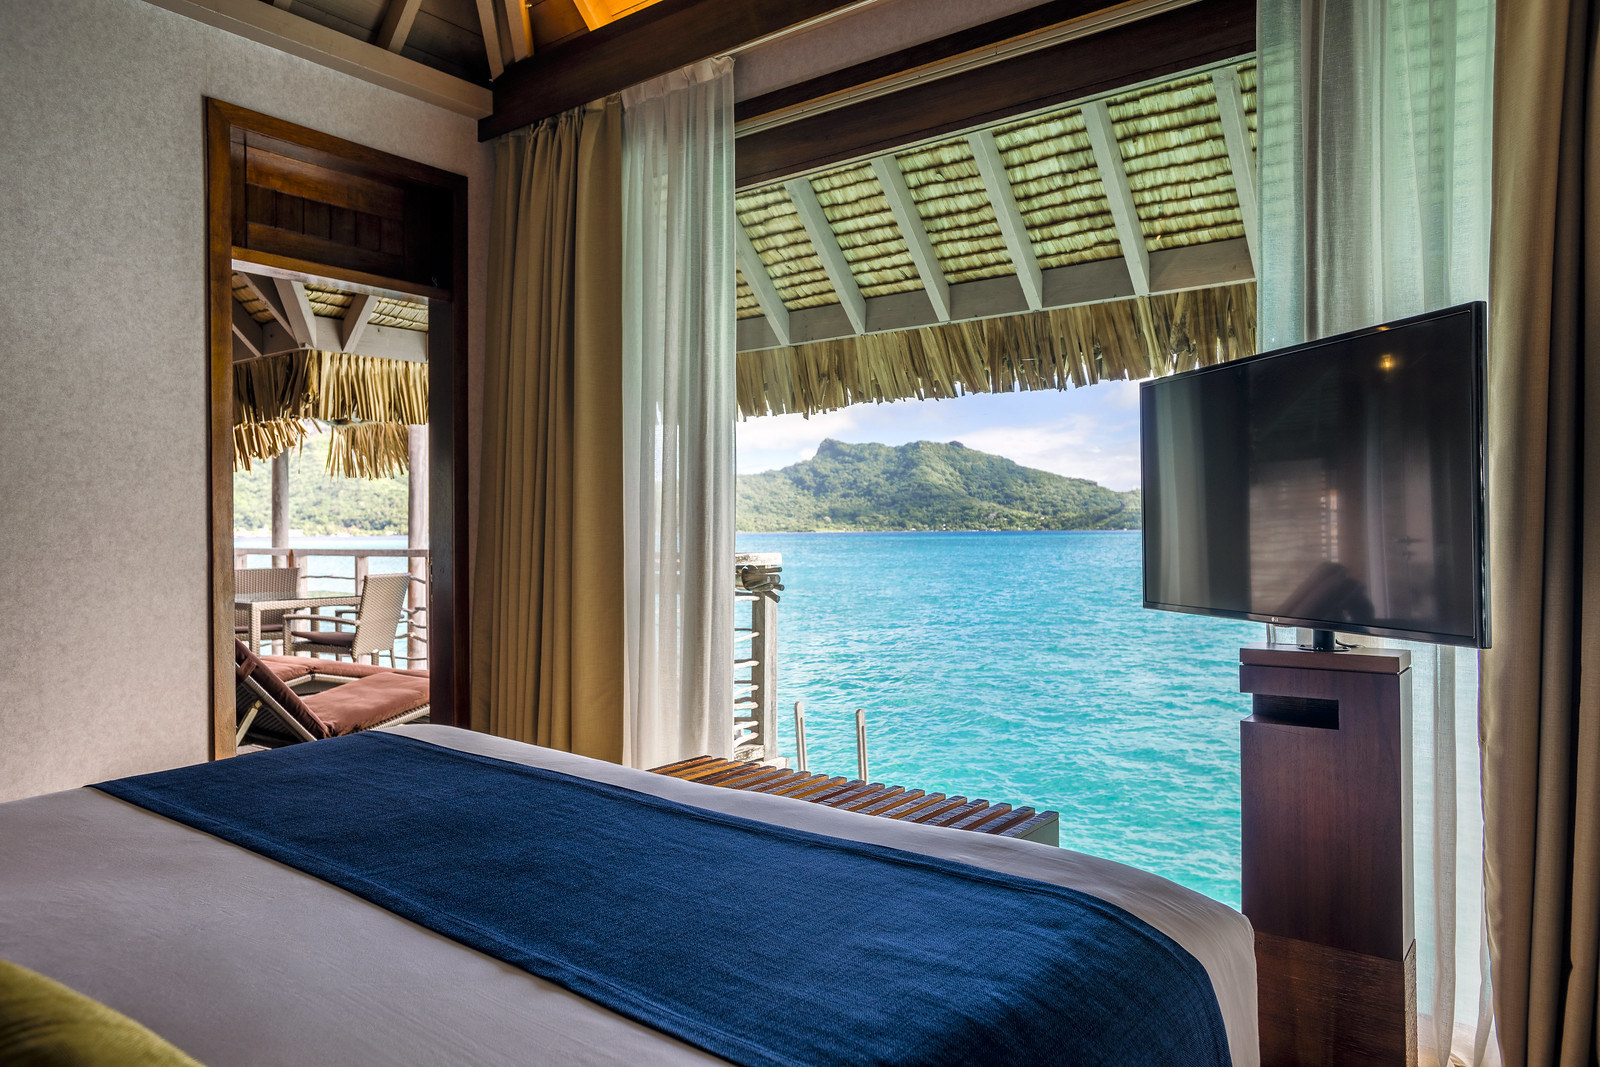 A view from the bedroom of one of the villas, which features a large picture window overlooking the ocean